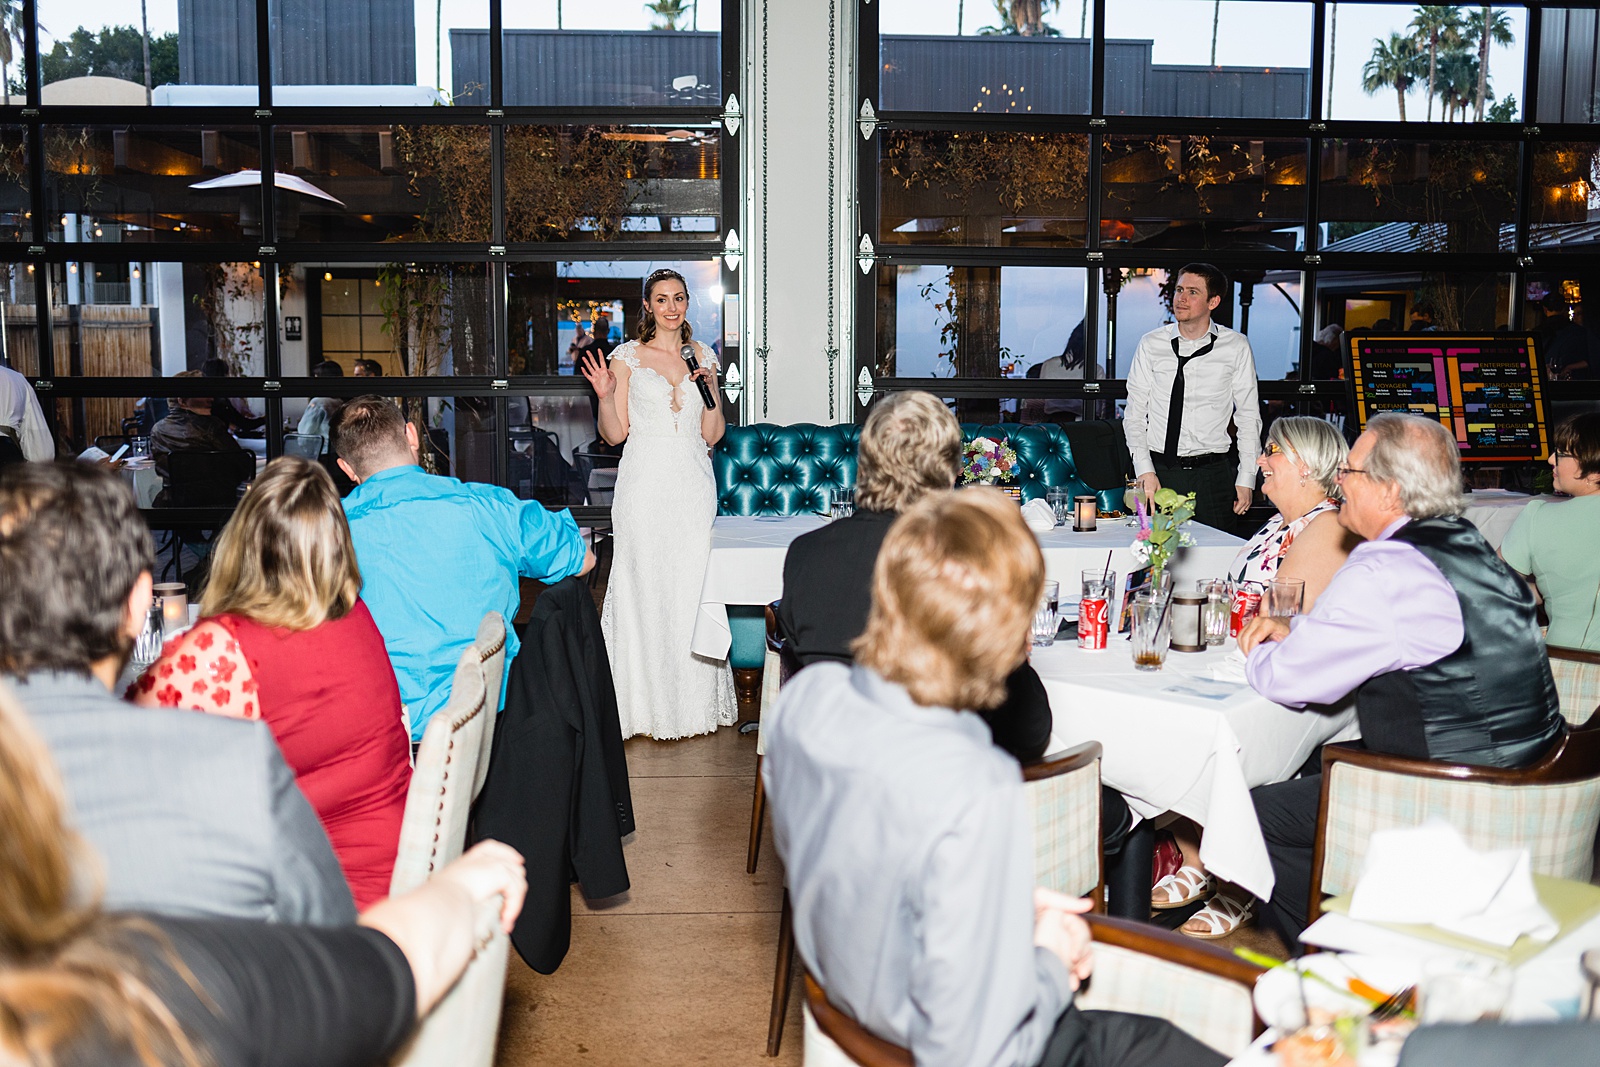 Toasts at Hidden House wedding reception by Chandler wedding photographer PMA Photography.